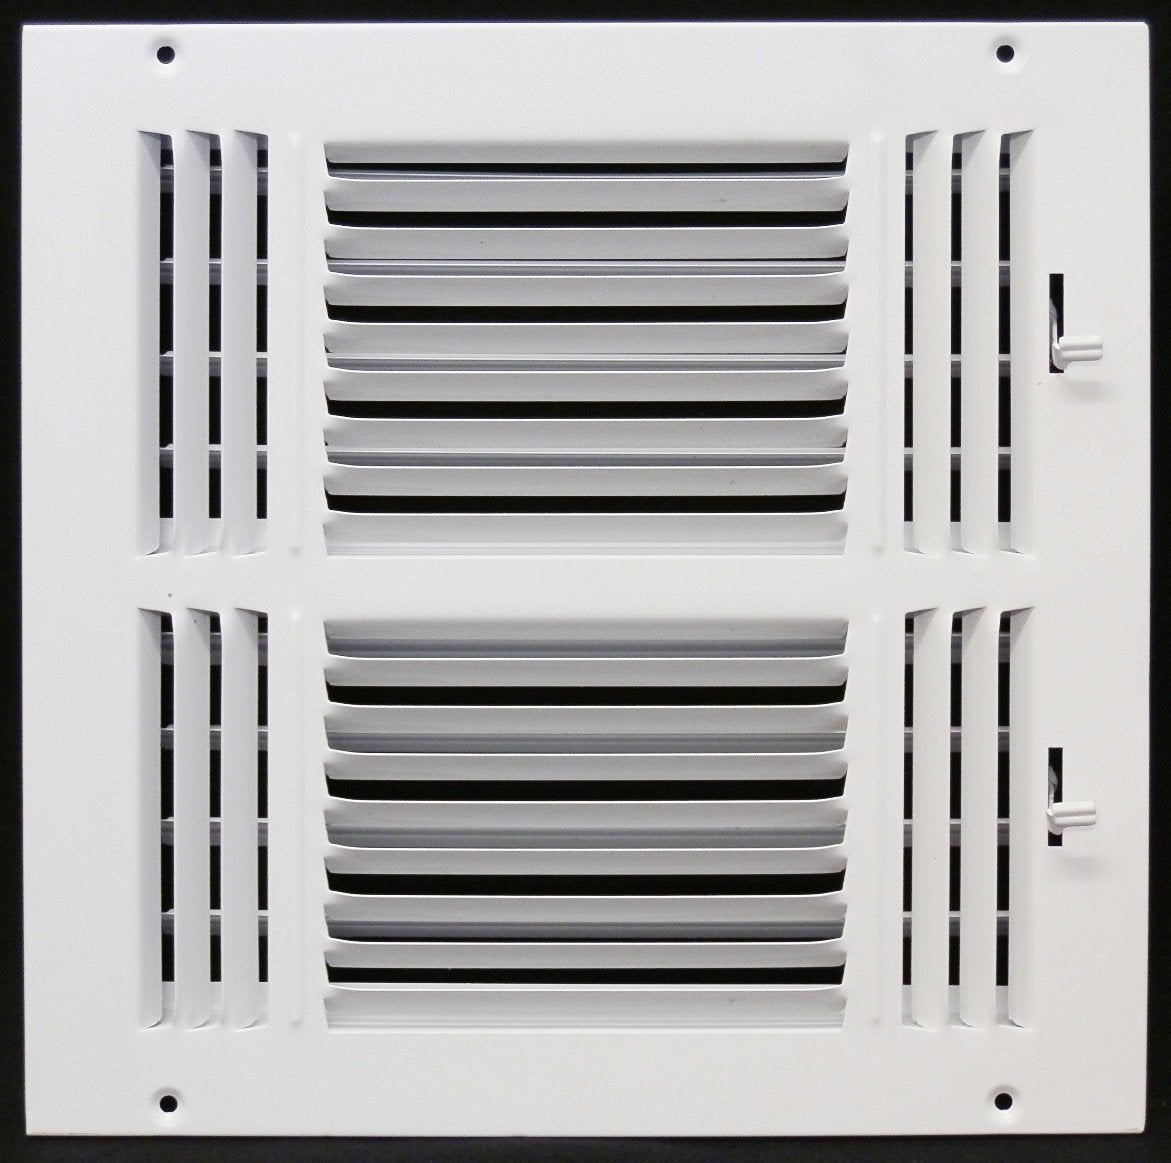 14&quot; X 12&quot; 3-Way AIR SUPPLY GRILLE - DUCT COVER &amp; DIFFUSER - Flat Stamped Face